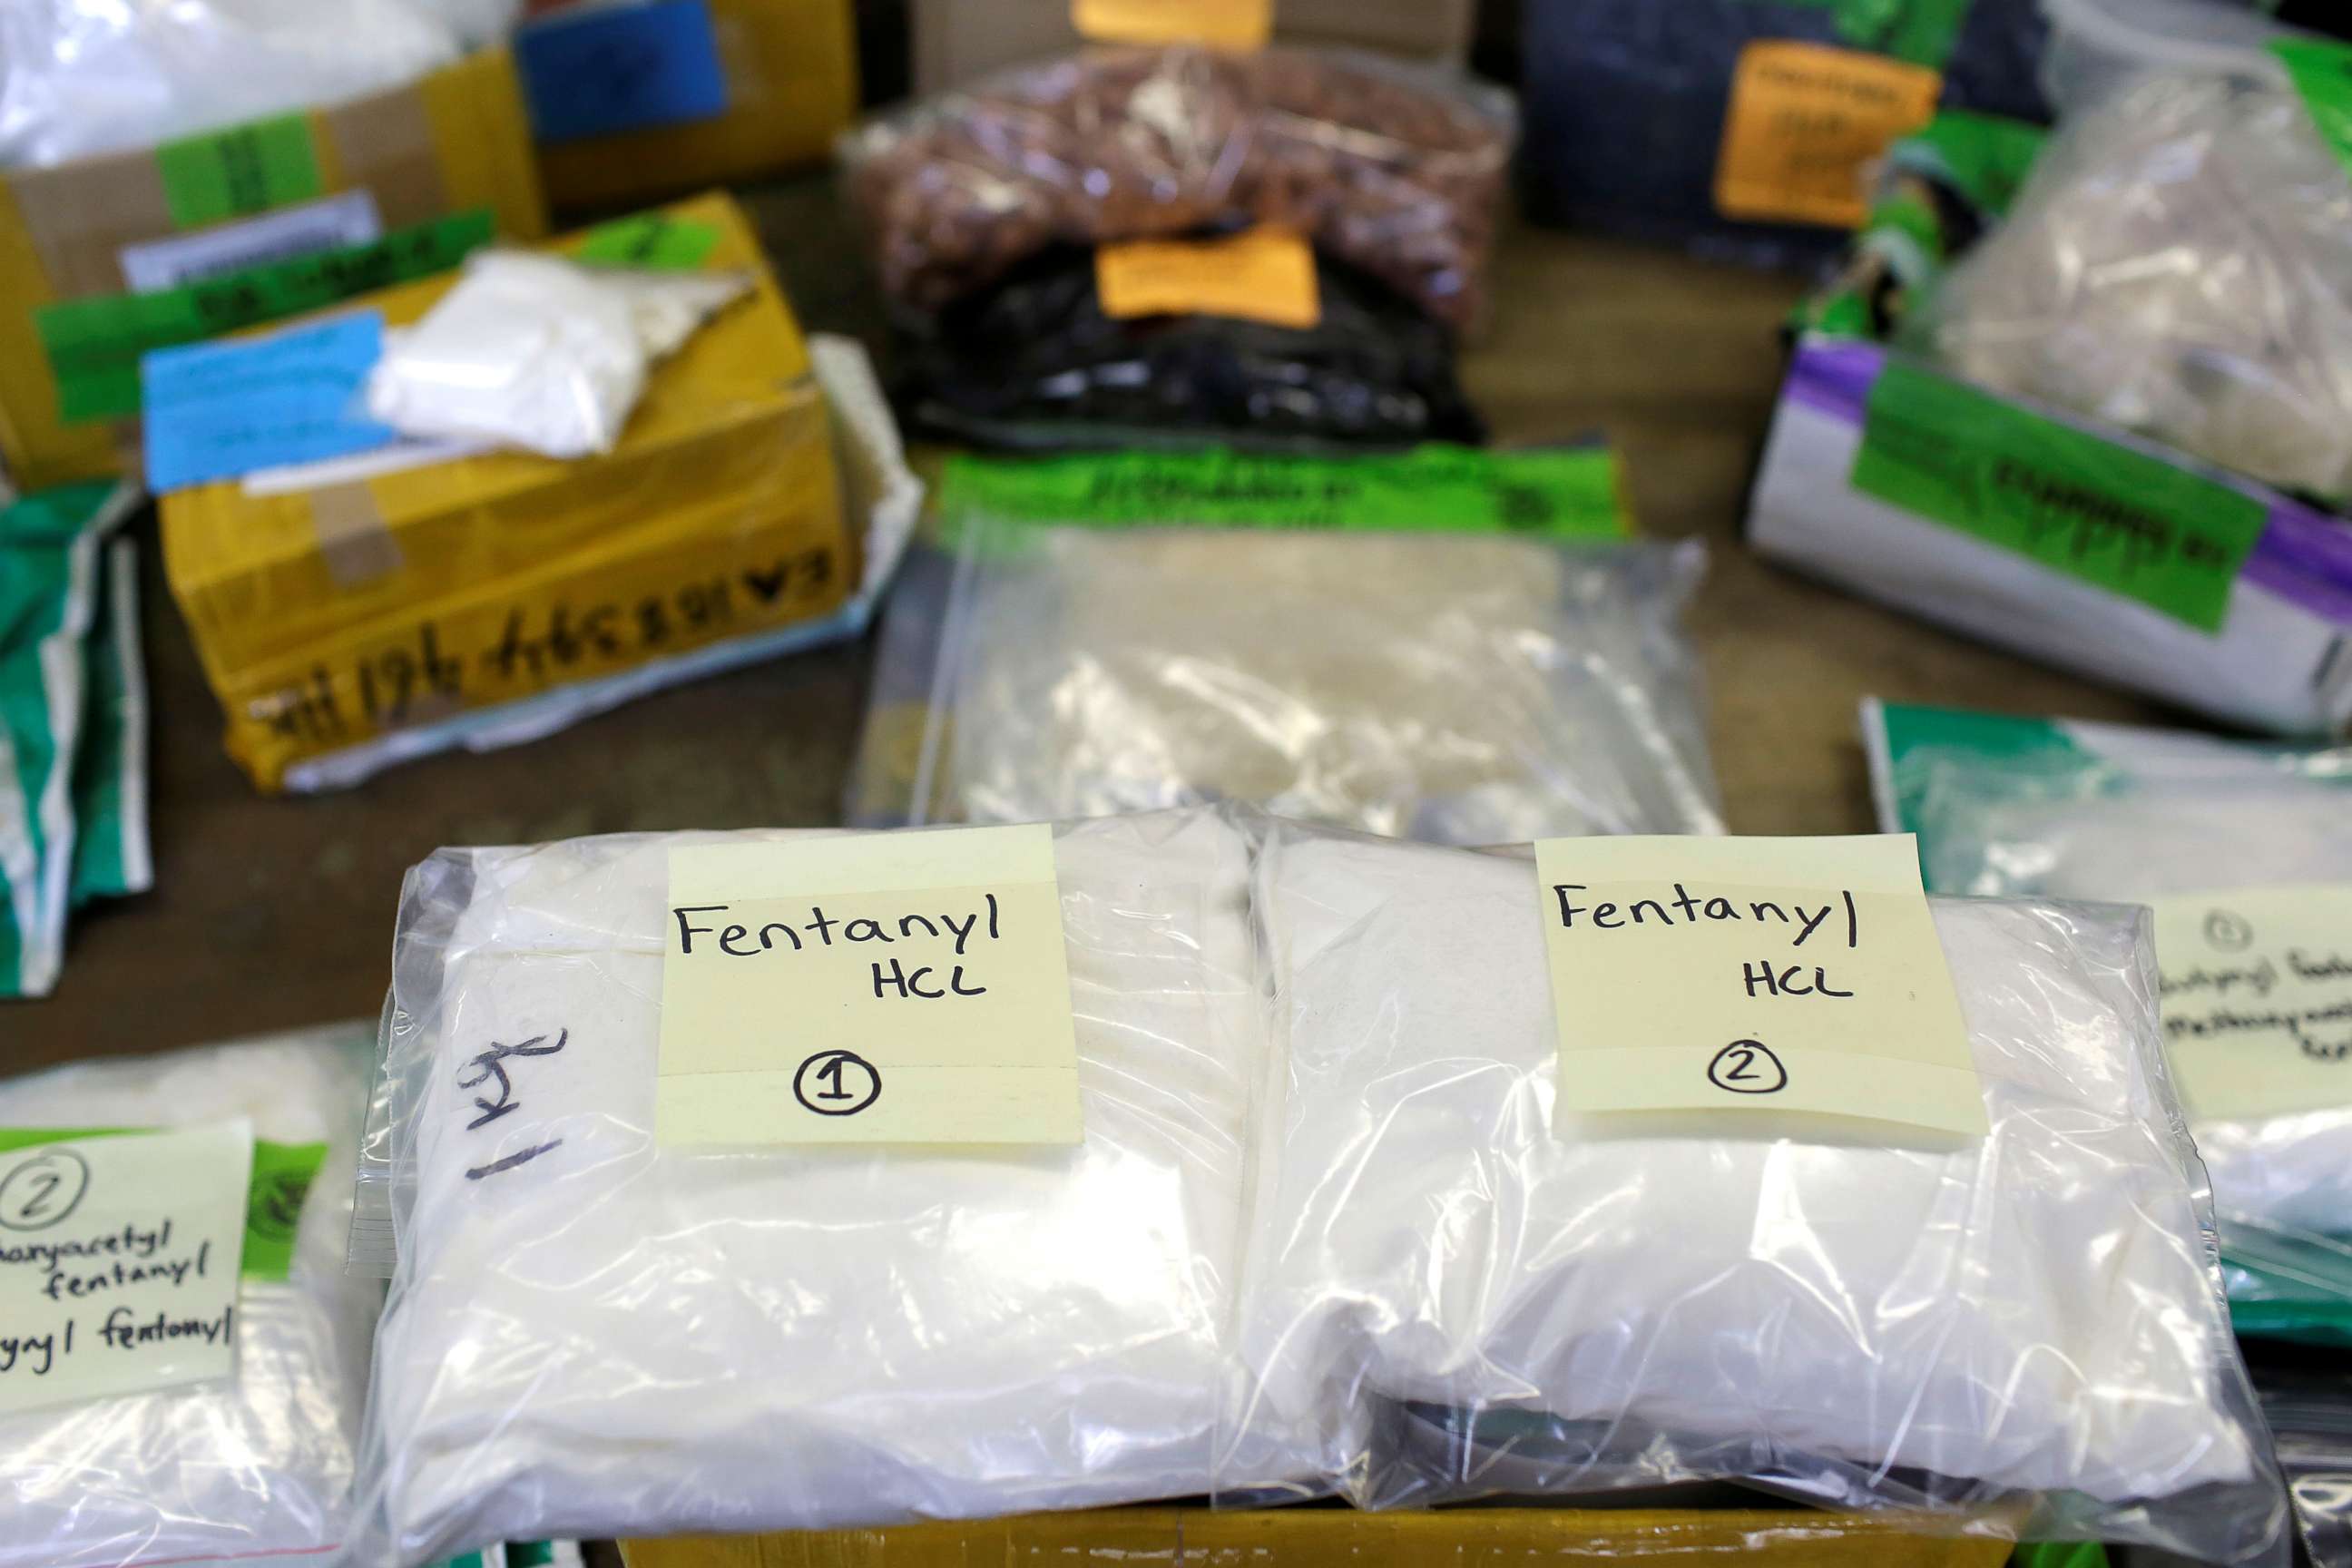 FILE PHOTO: Plastic bags of Fentanyl are displayed on a table at the U.S. Customs and Border Protection area at O'Hare International Airport in Chicago in this Nov. 29, 2017, file photo.